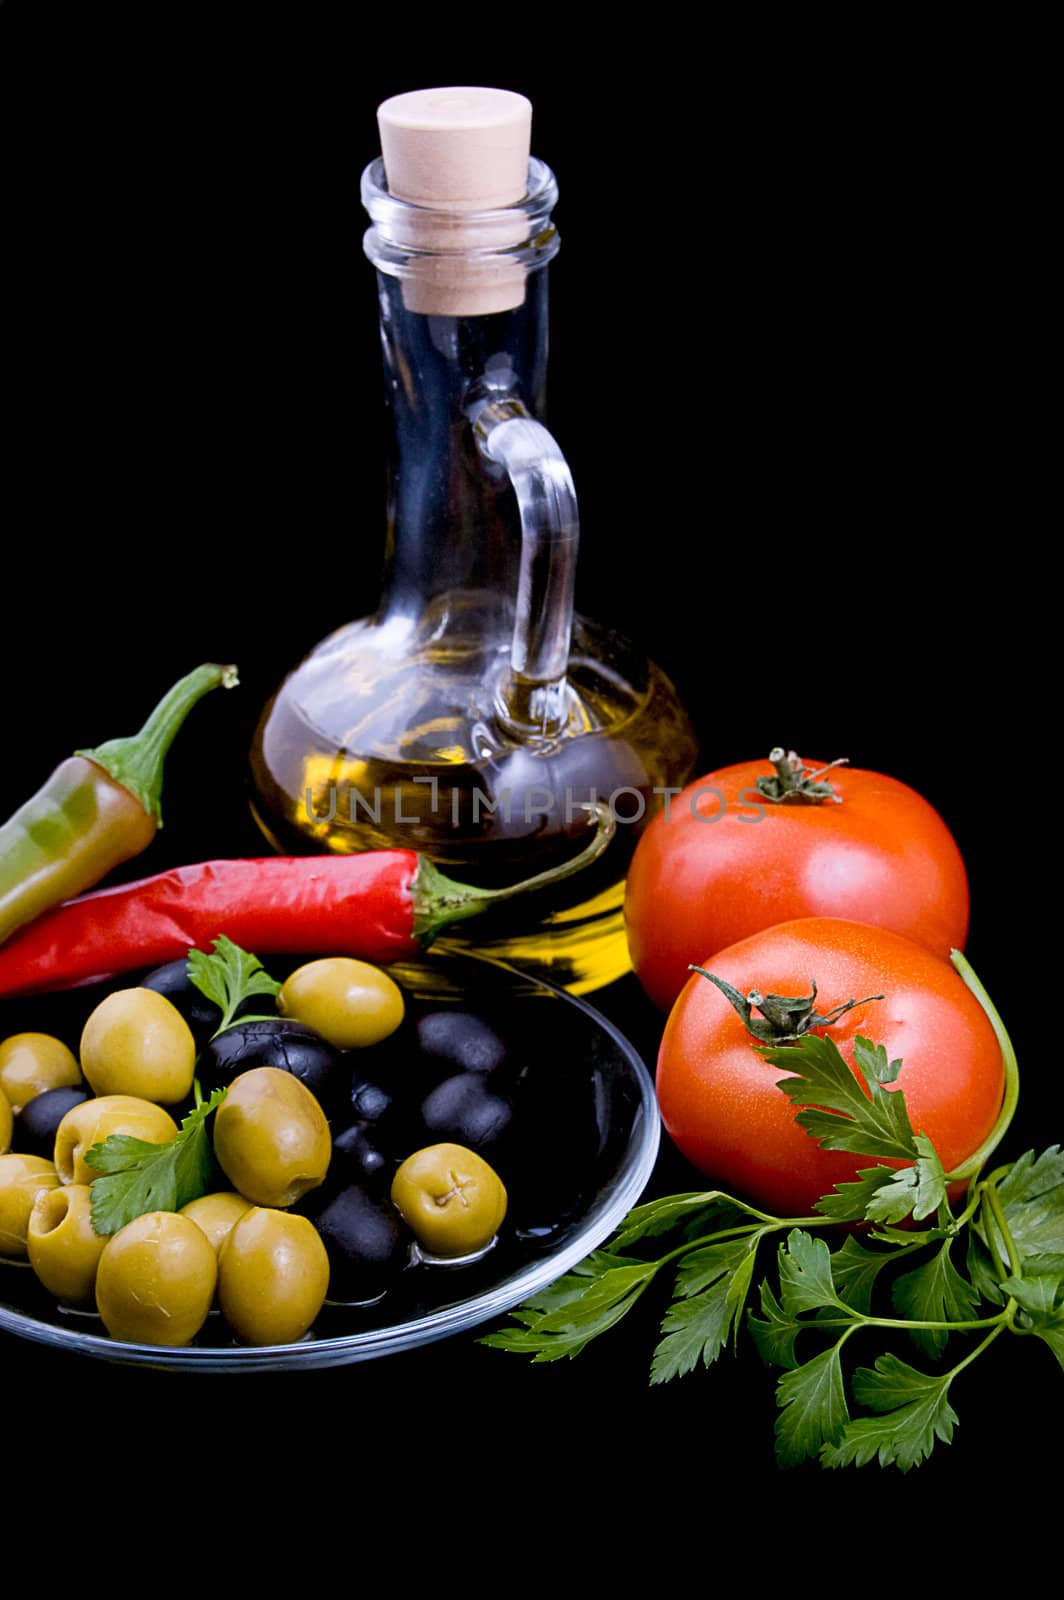 Olive oil, tomatoes, pepper and greens by Angel_a